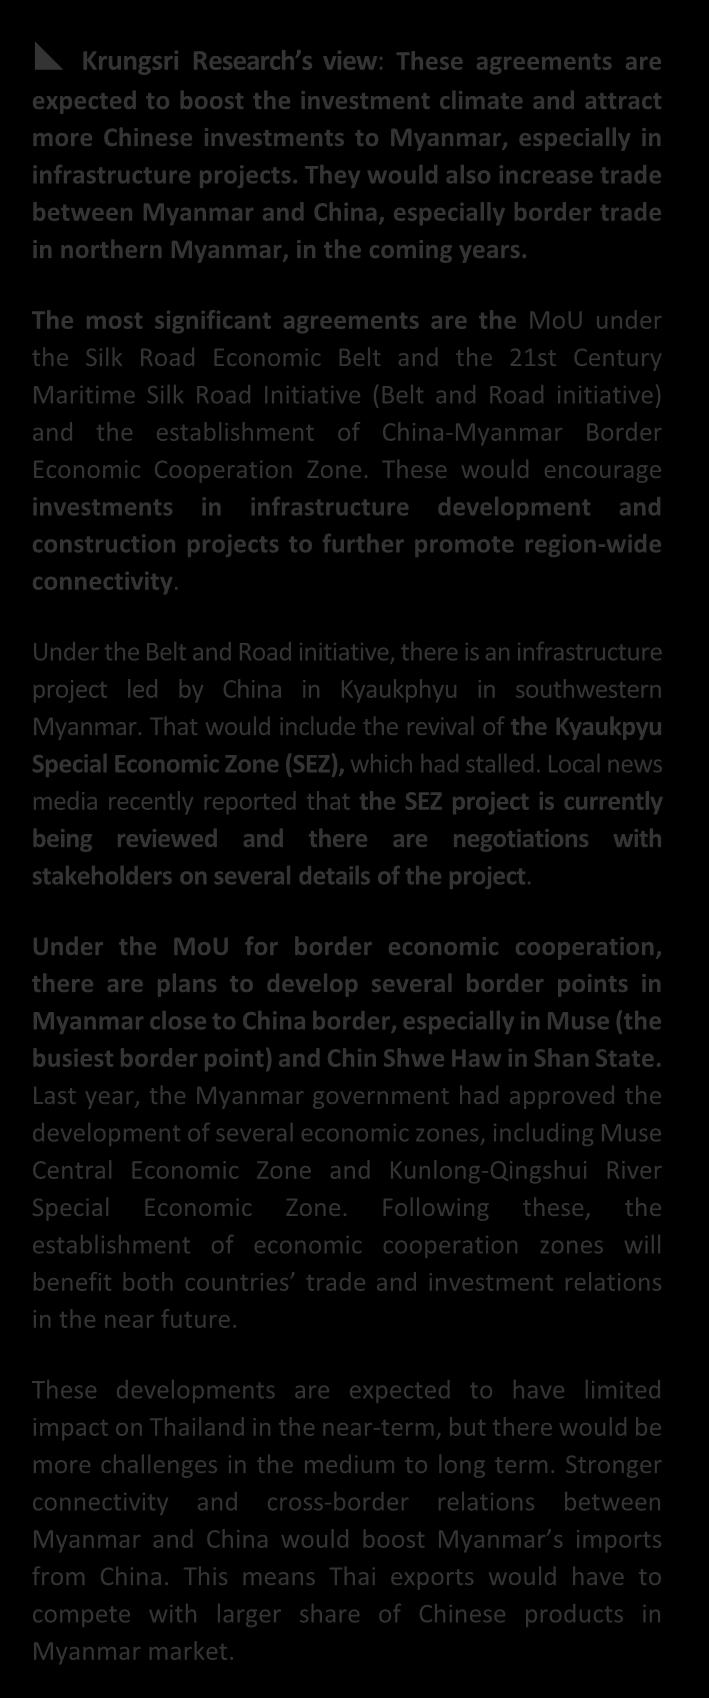 Myanmar and China sign five agreements to strengthen bilateral cooperation In May 2017, during an official visit led by Myanmar s Foreign Minister Daw Aung San Suu Kyi to attend the Belt and Road